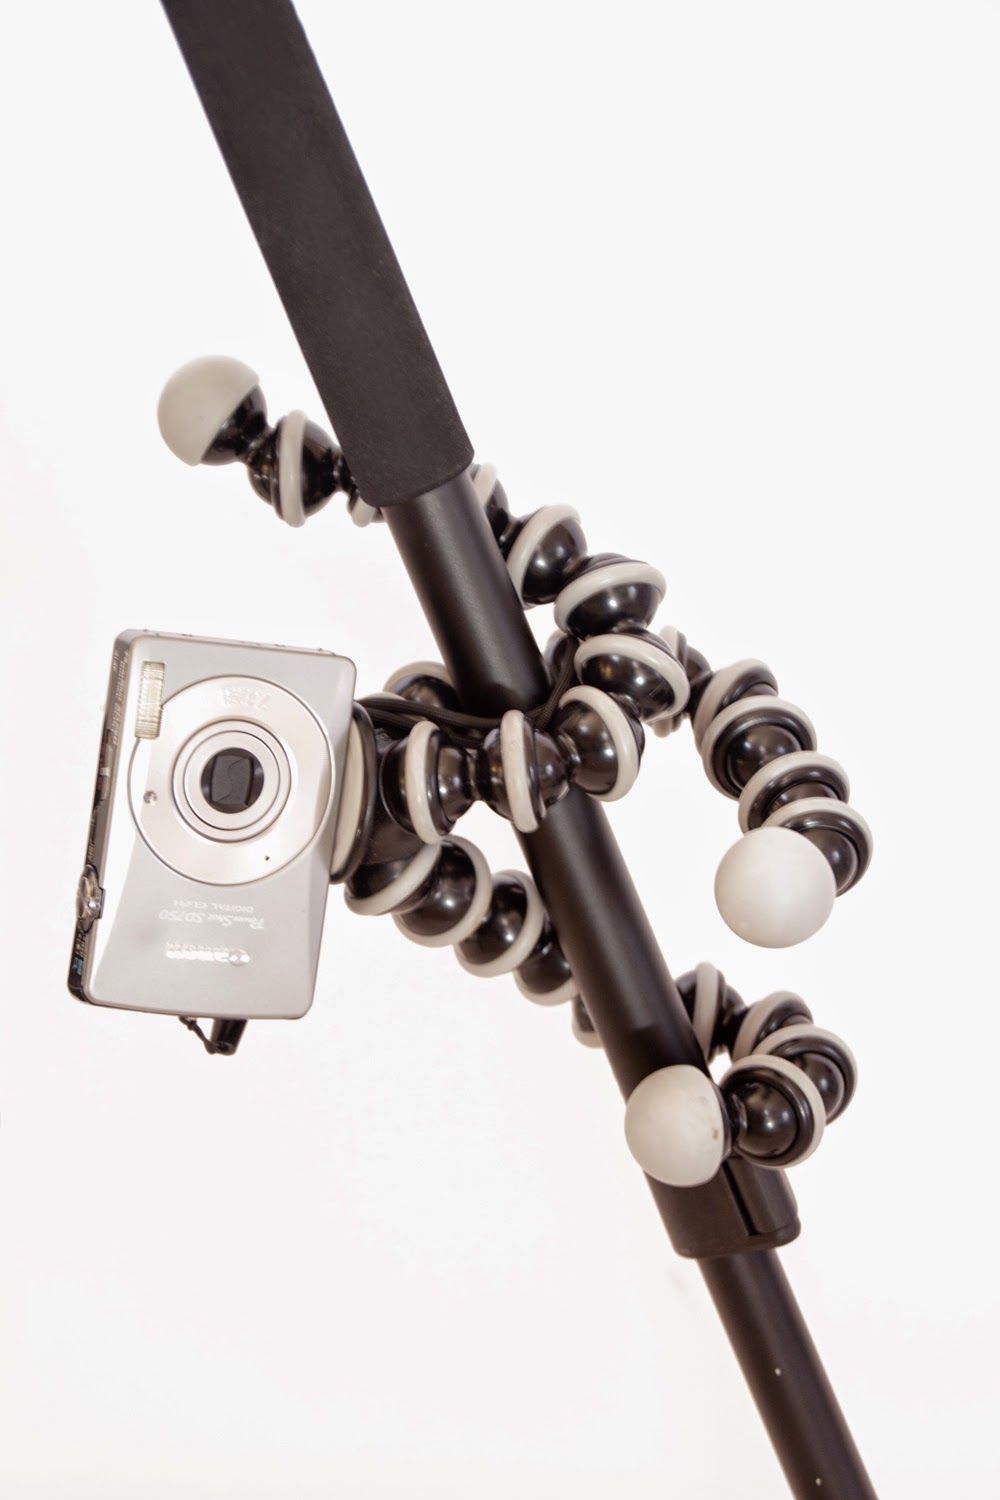 GorillaPod Tripod Review | Boost Your Photography